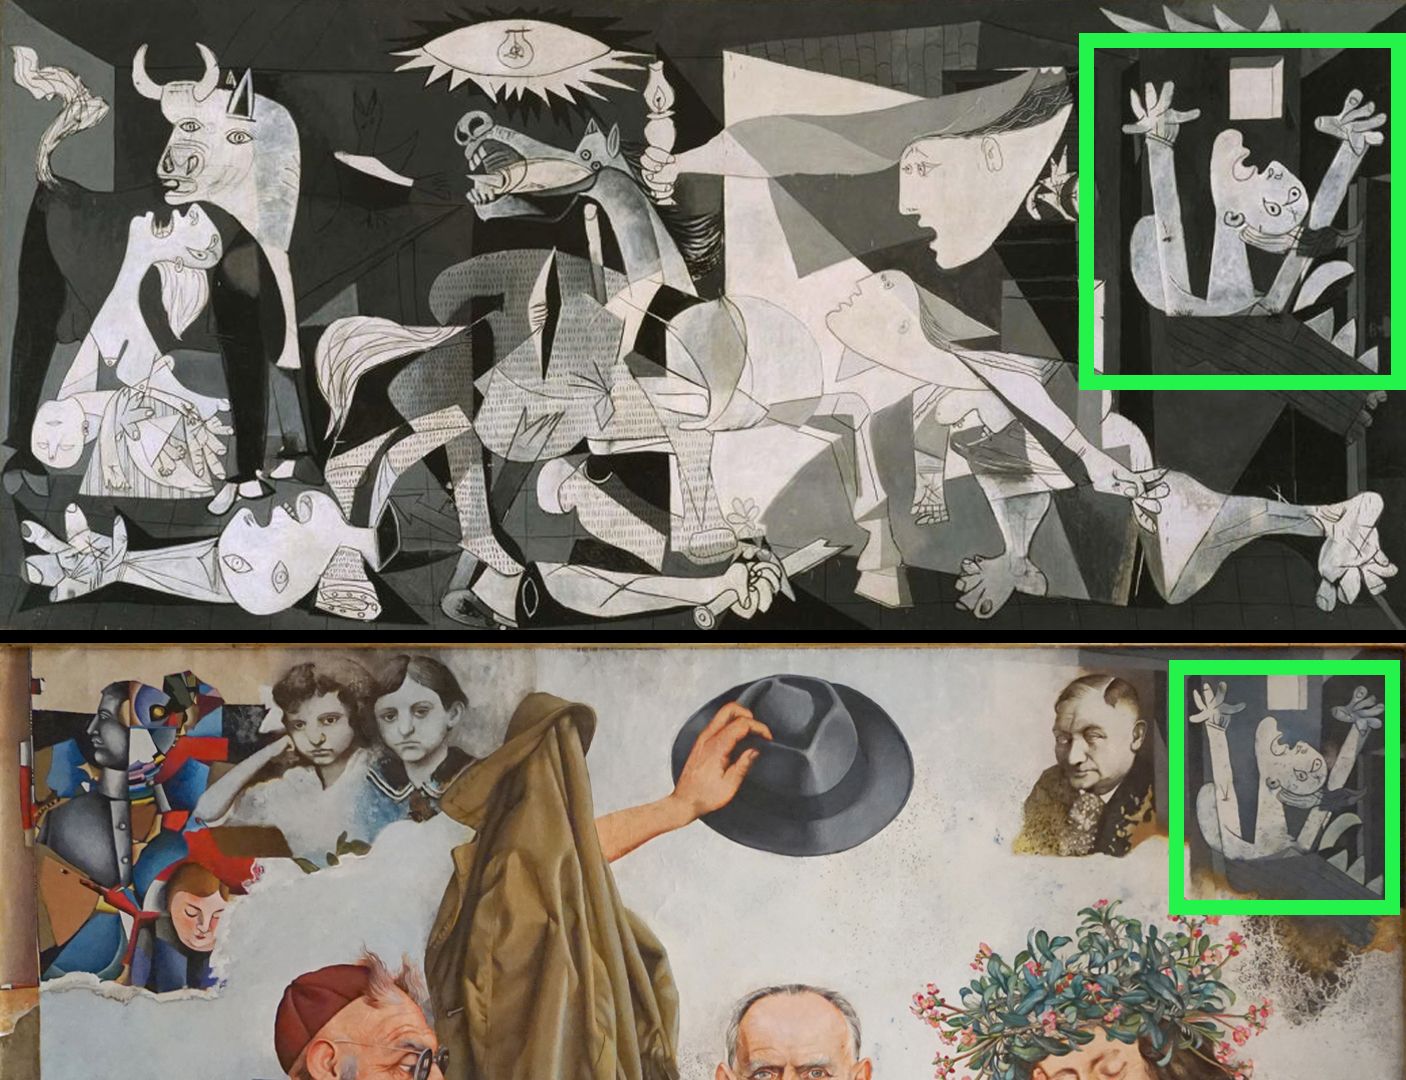 Hermann Kesten in the Café Comparison with Picasso's "Guernica" from 1937 (The Basque town of Guernika was destroyed in 1937 by an air raid of the German Condor Legion, a "training ground" of the German Luftwaffe and harbinger of the Second World War)